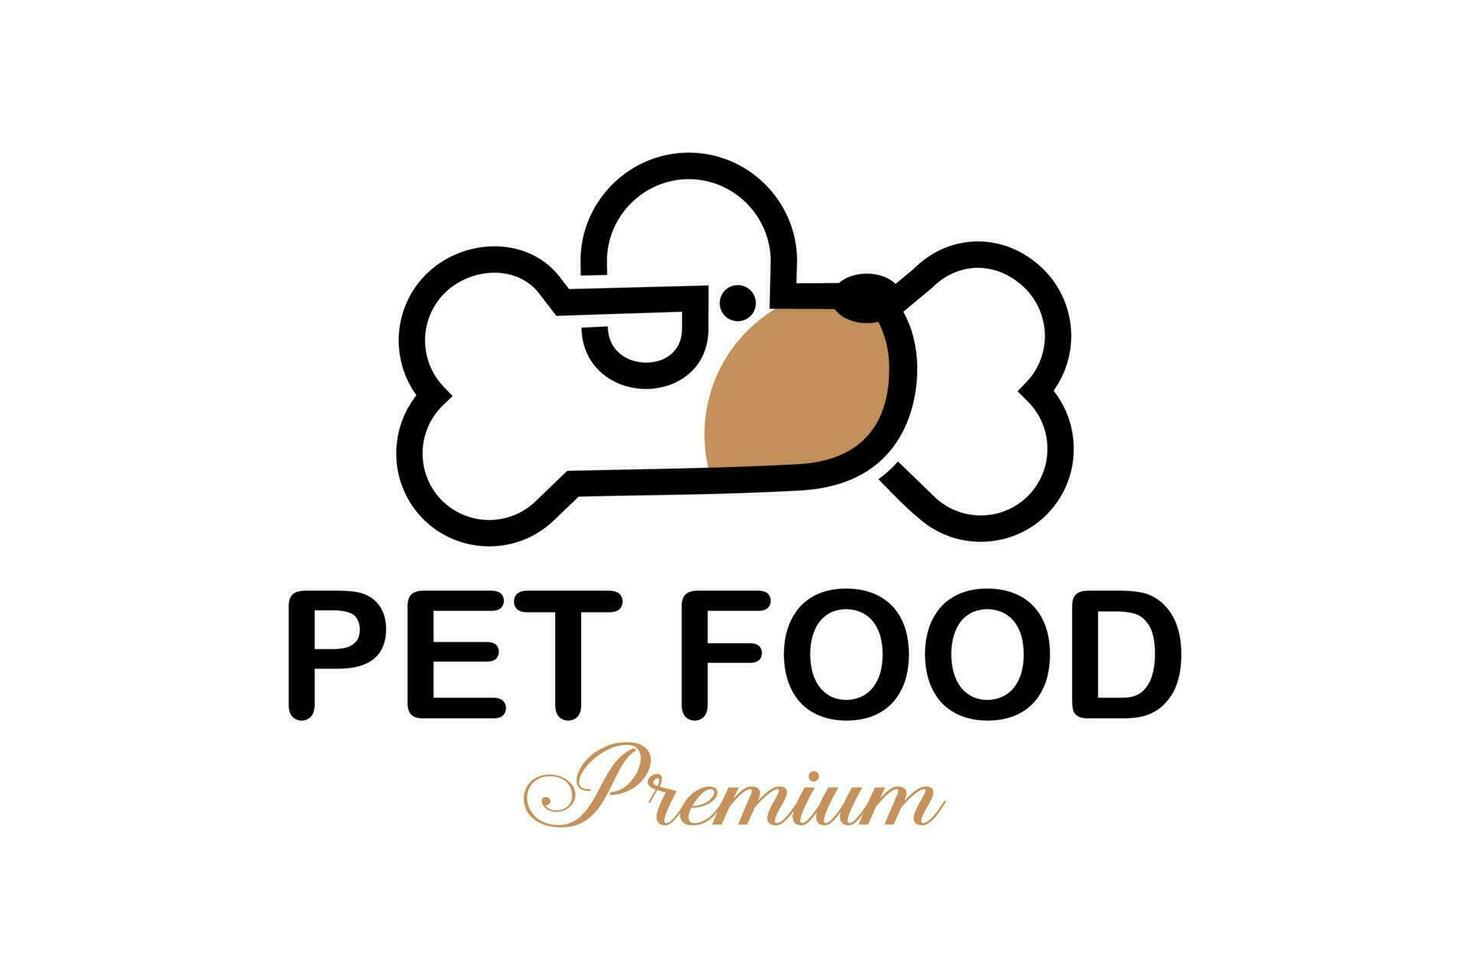 dog logo design. logos can be used for pet care,clinic and veterinary. vector